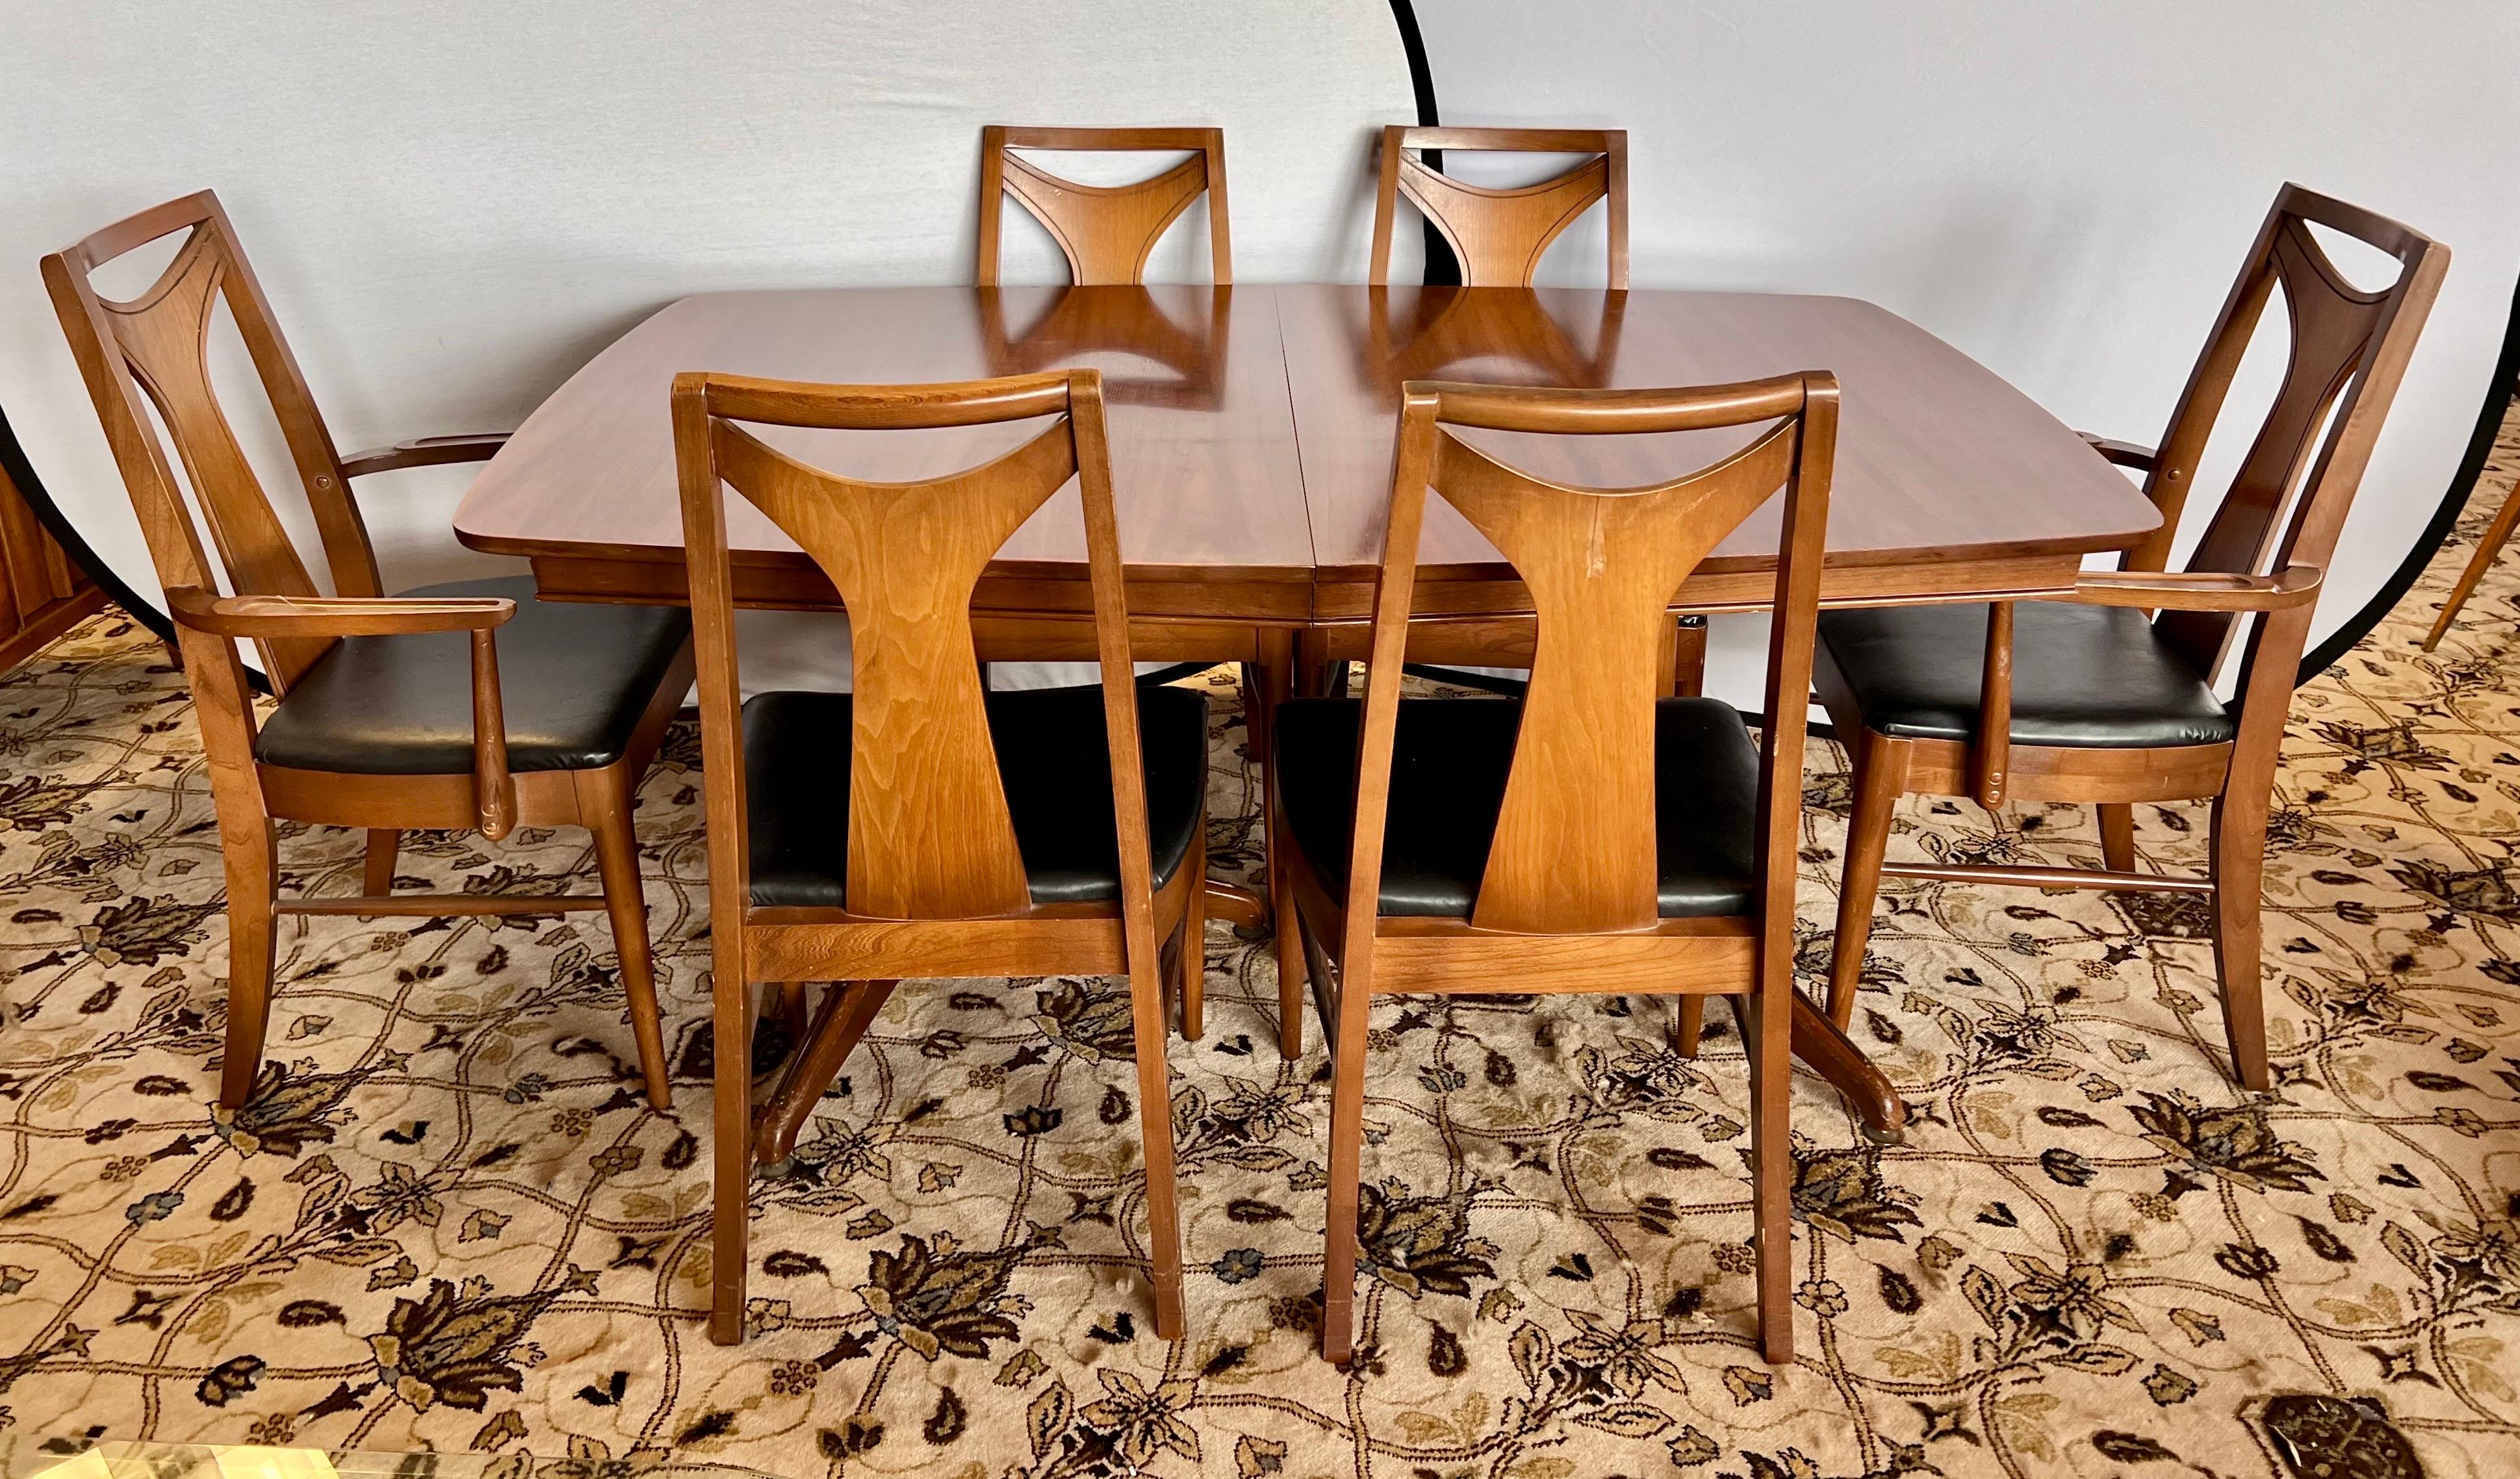 Expandable mid century classic Kent Coffey dining room set that includes table, chairs and one leaf.  The table expands from 64